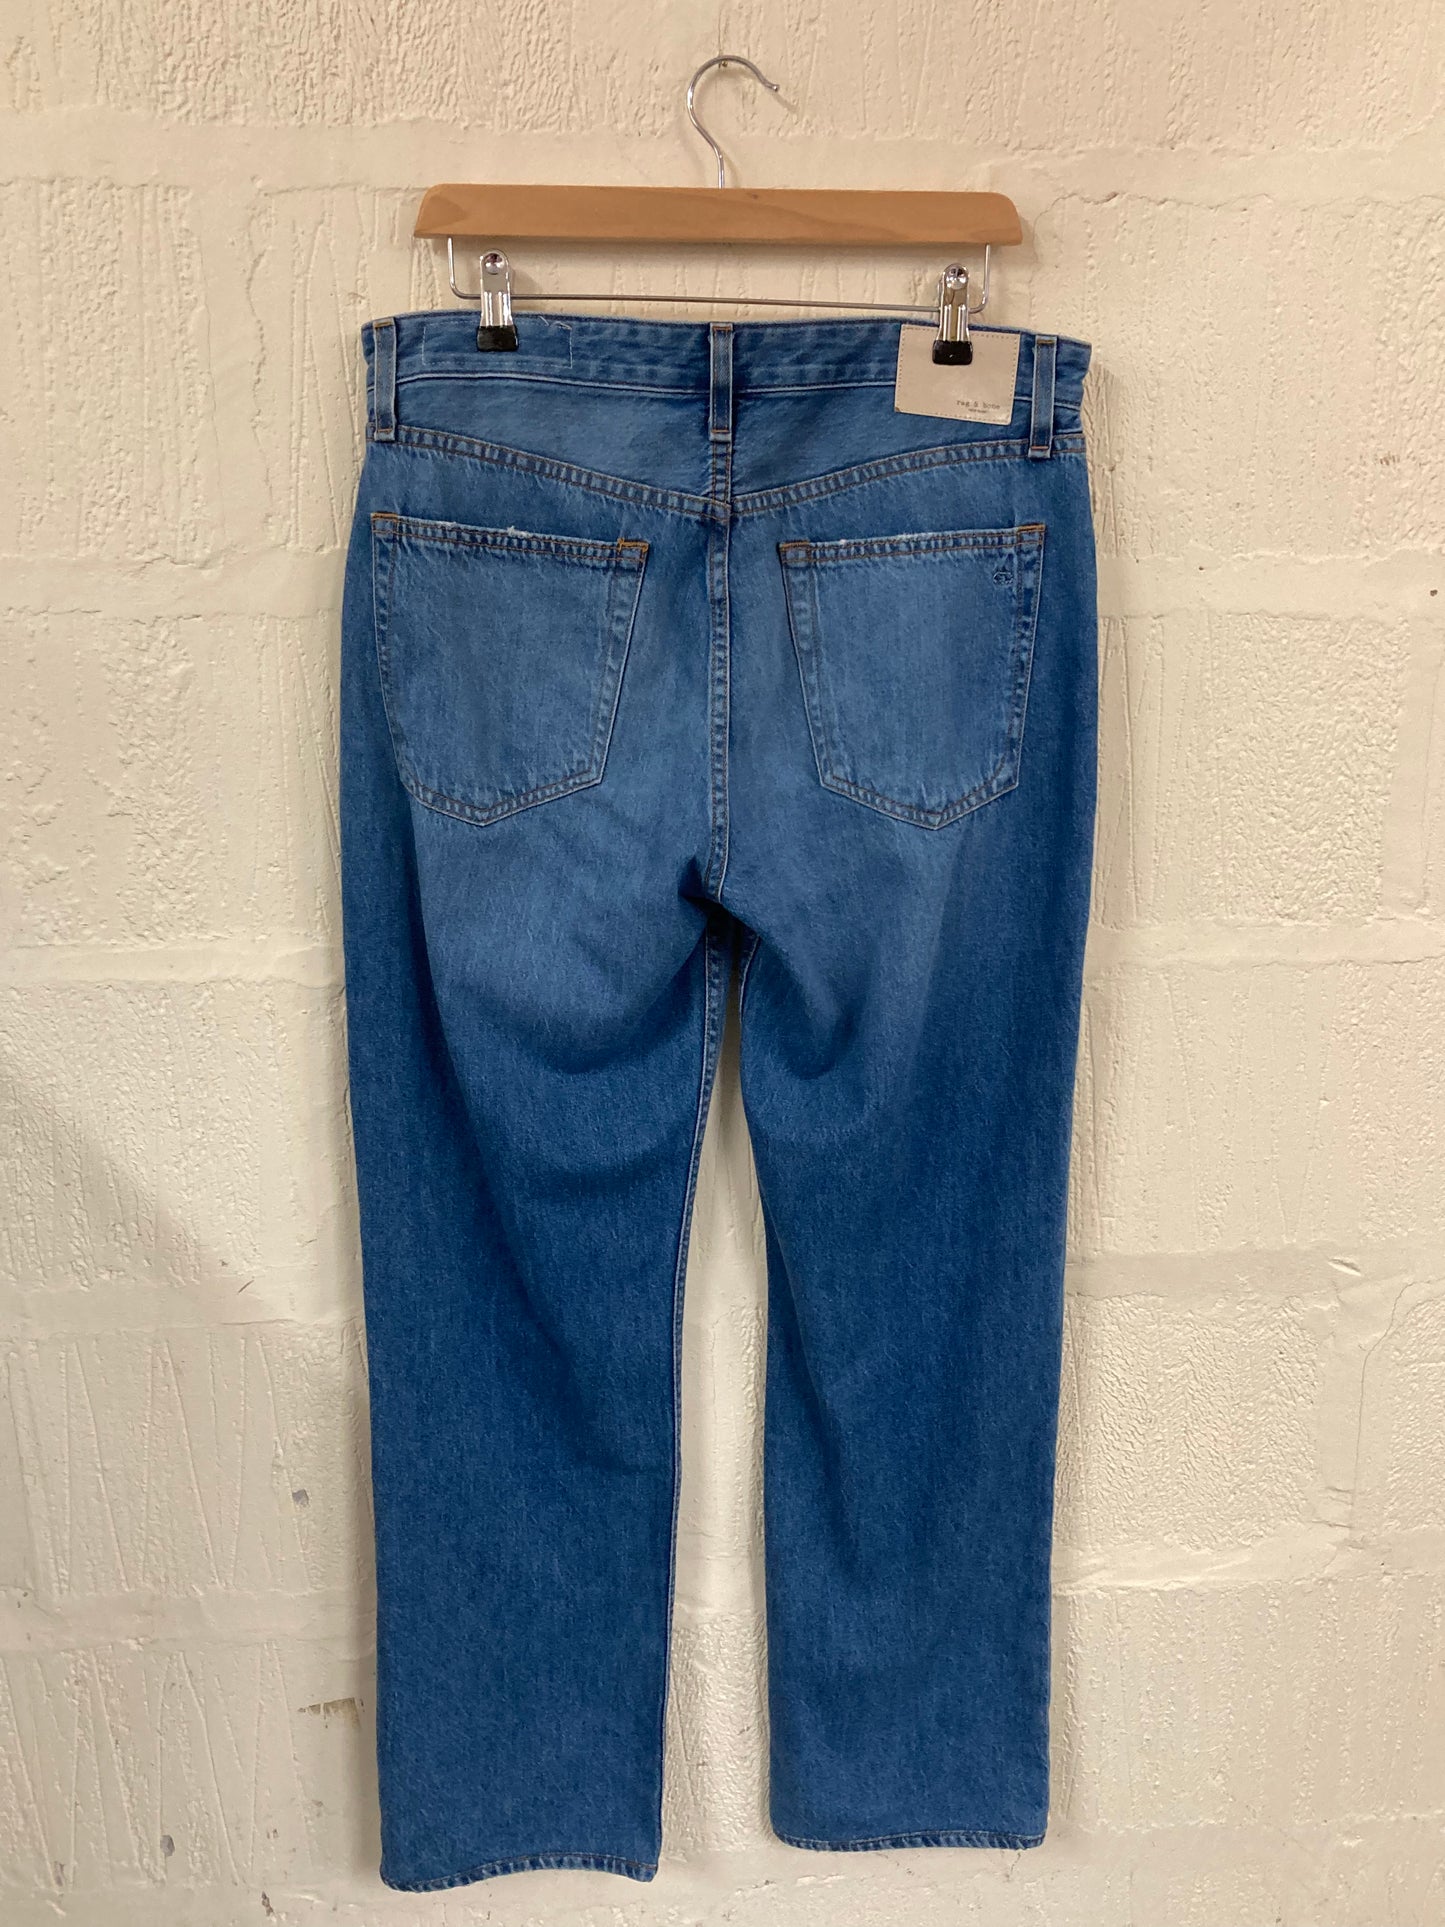 1990s Style Rag and Bone Denim Wide and Low Waist Jeans  Size 30, Size 12